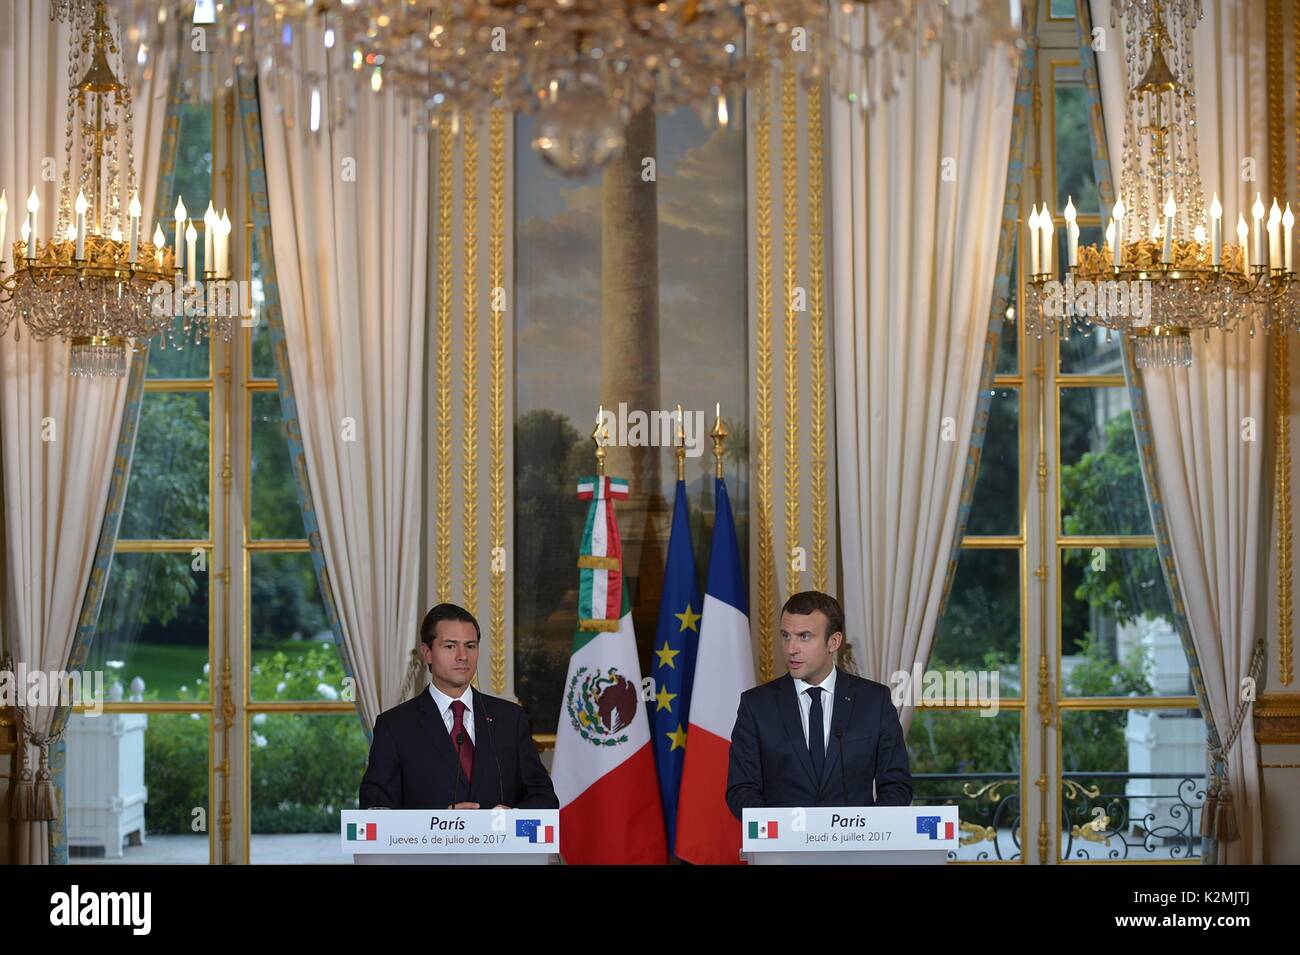 Mexican President Enrique Pena Nieto, left, during a joint press conference with French President Emmanuel Macron at the Elysee Palace July 7, 2017 in Paris, France. Stock Photo